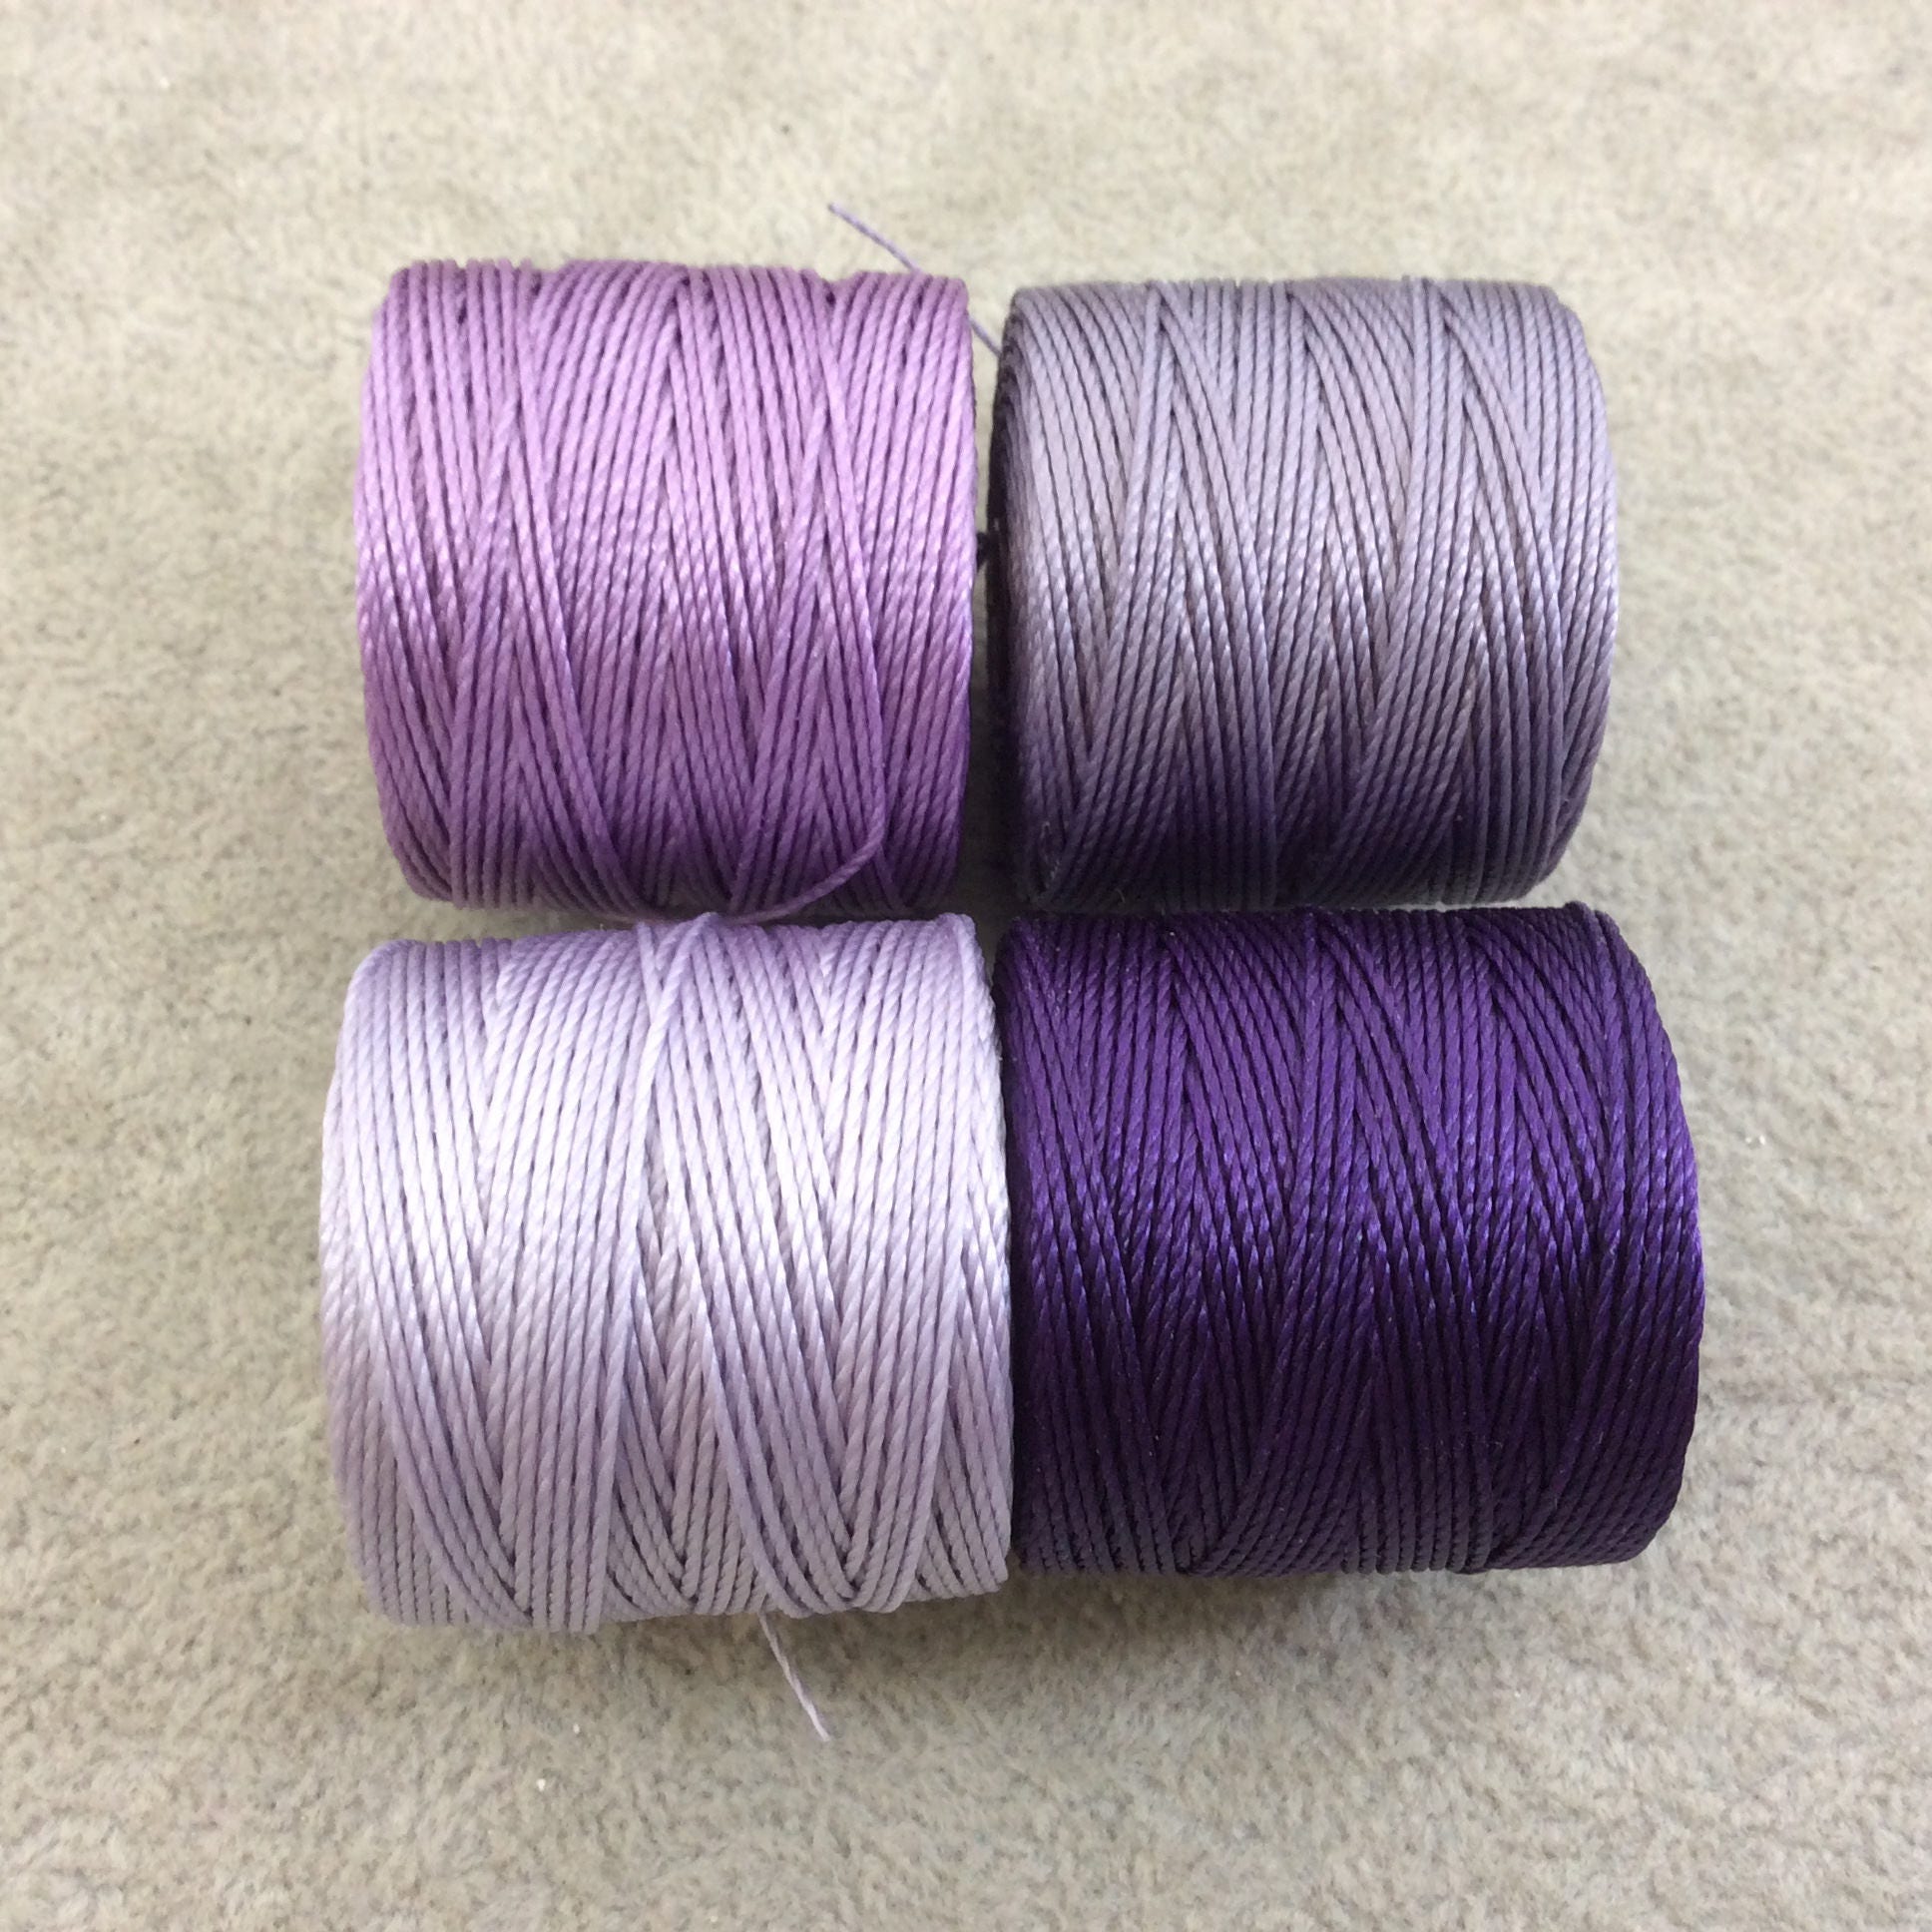 SET OF 4 - Beadsmith S-Lon 210 Color Coordinated Lilac Purples Mix Nylon  Macrame/Jewelry Cord Spool Set - 0.5mm Thick - (SL210-MIX101)